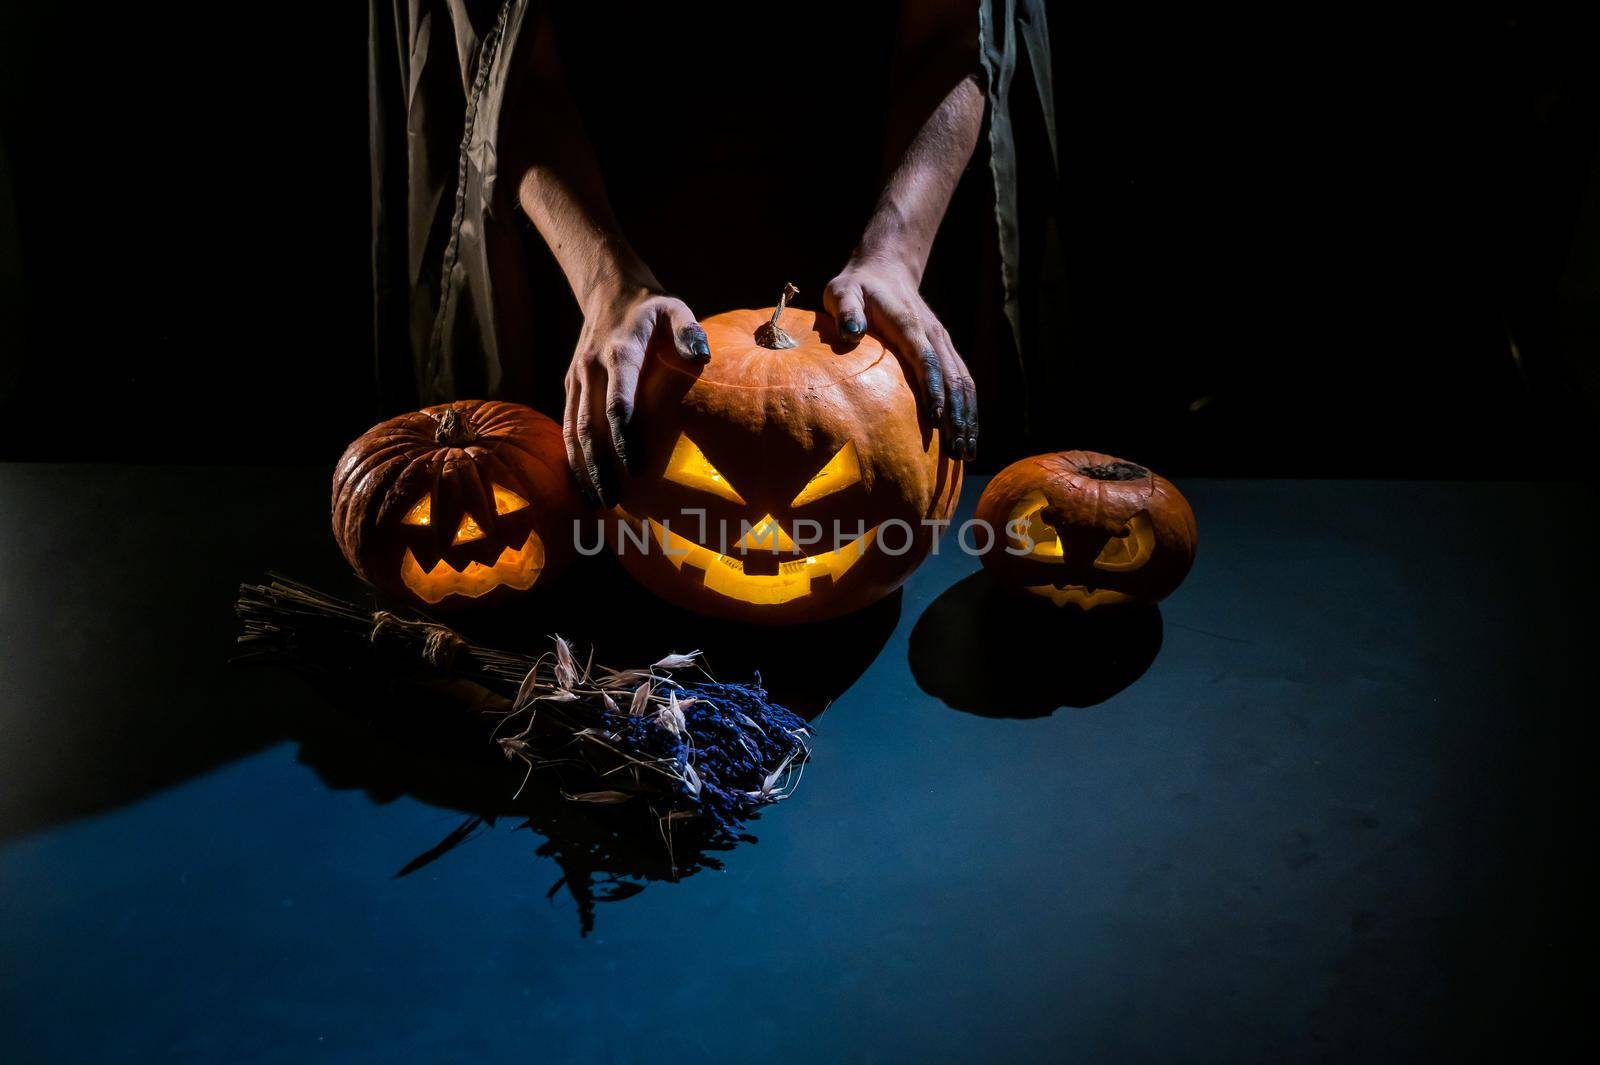 Close-up of female hands holding a halloween pumpkin in the dark.